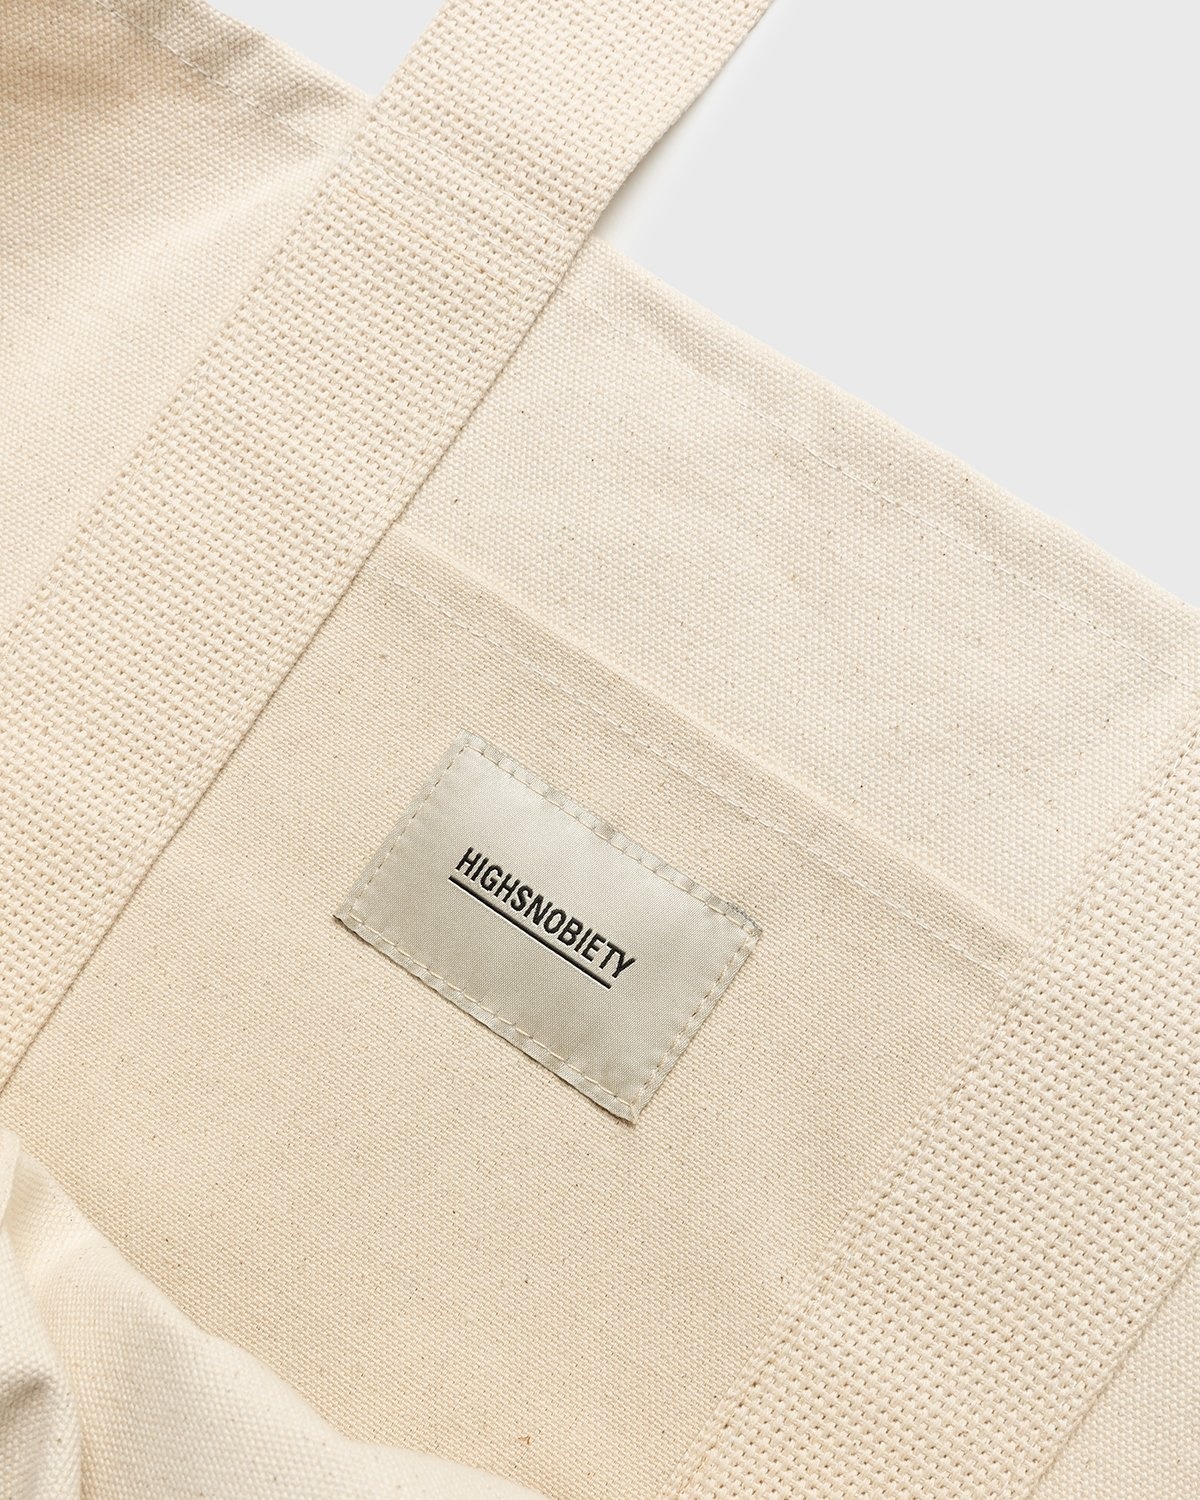 Highsnobiety – XL Canvas "H" Tote Natural - Tote Bags - Beige - Image 5